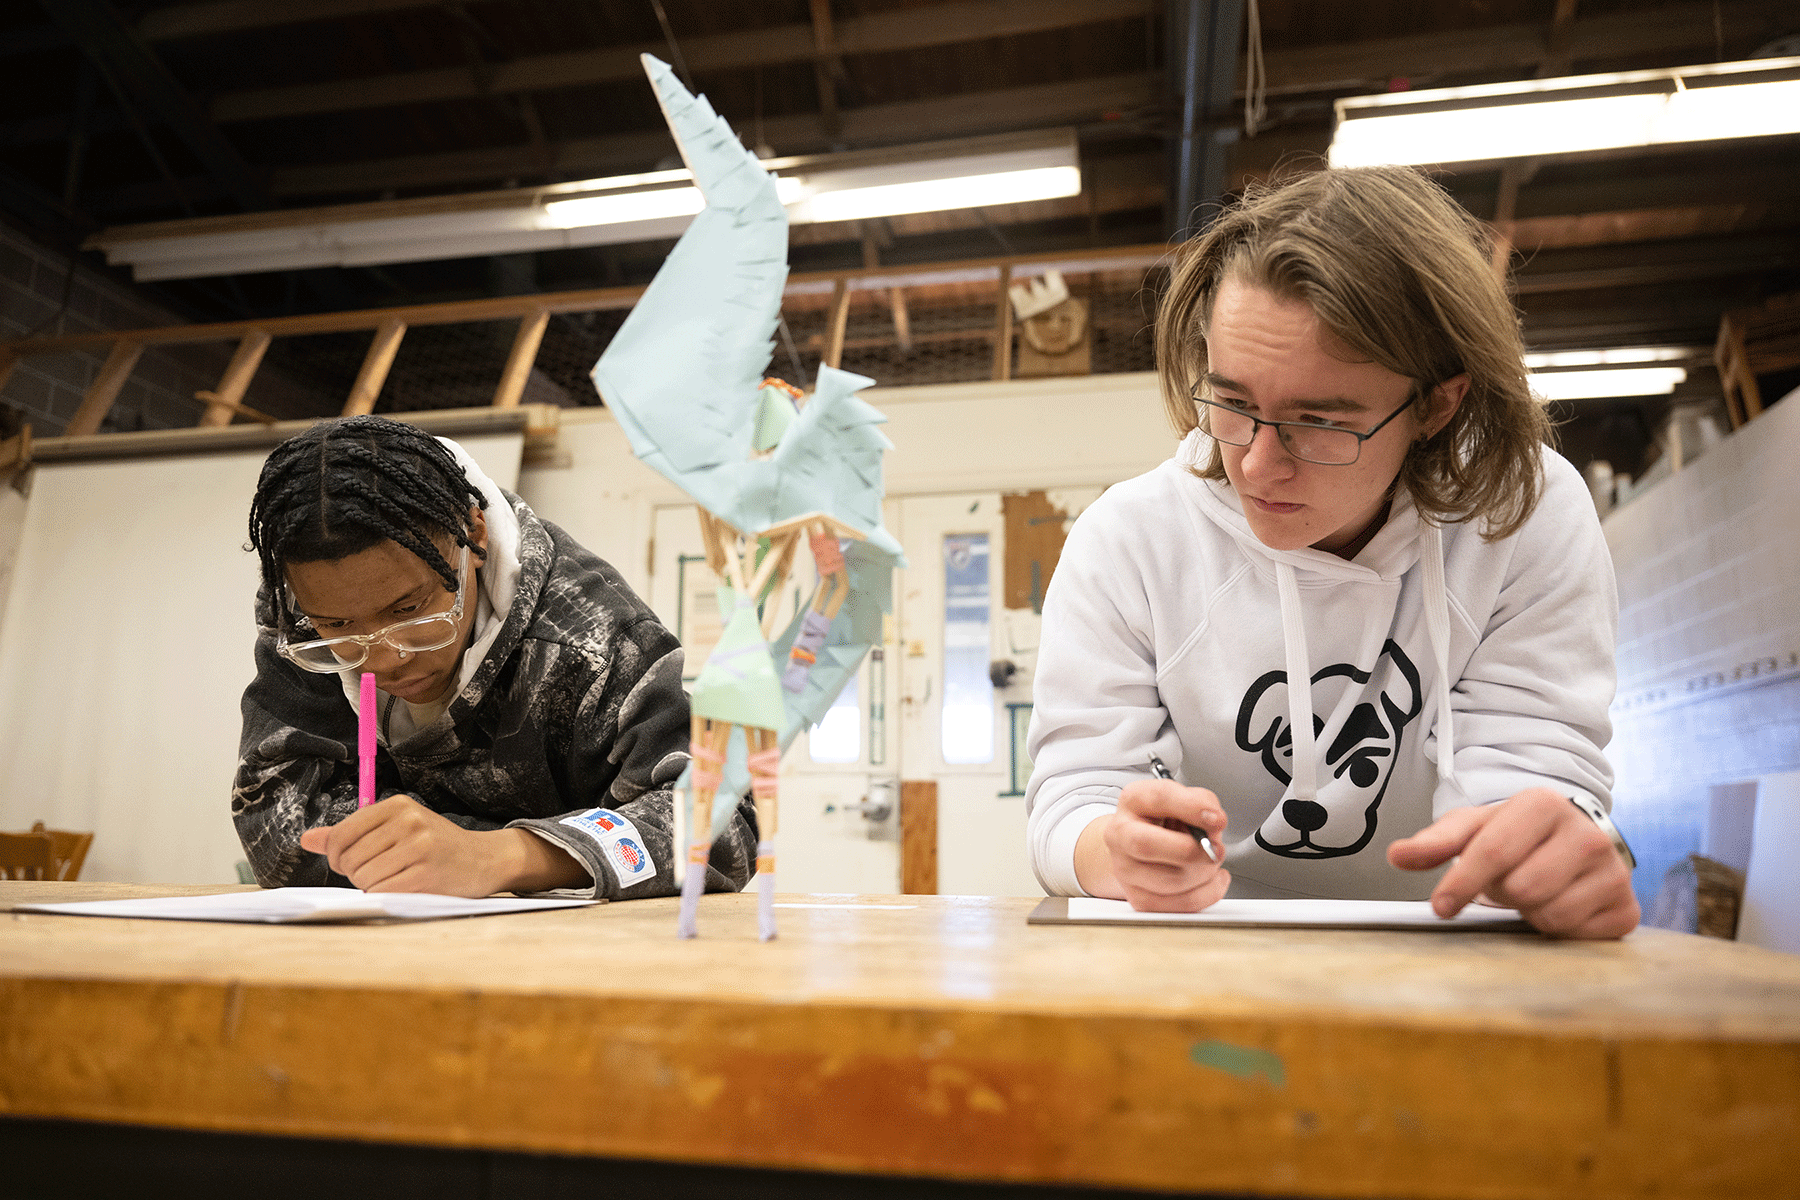 Two students seated in a workshop observe a sculpture that is on a table while writing their observations on paper.